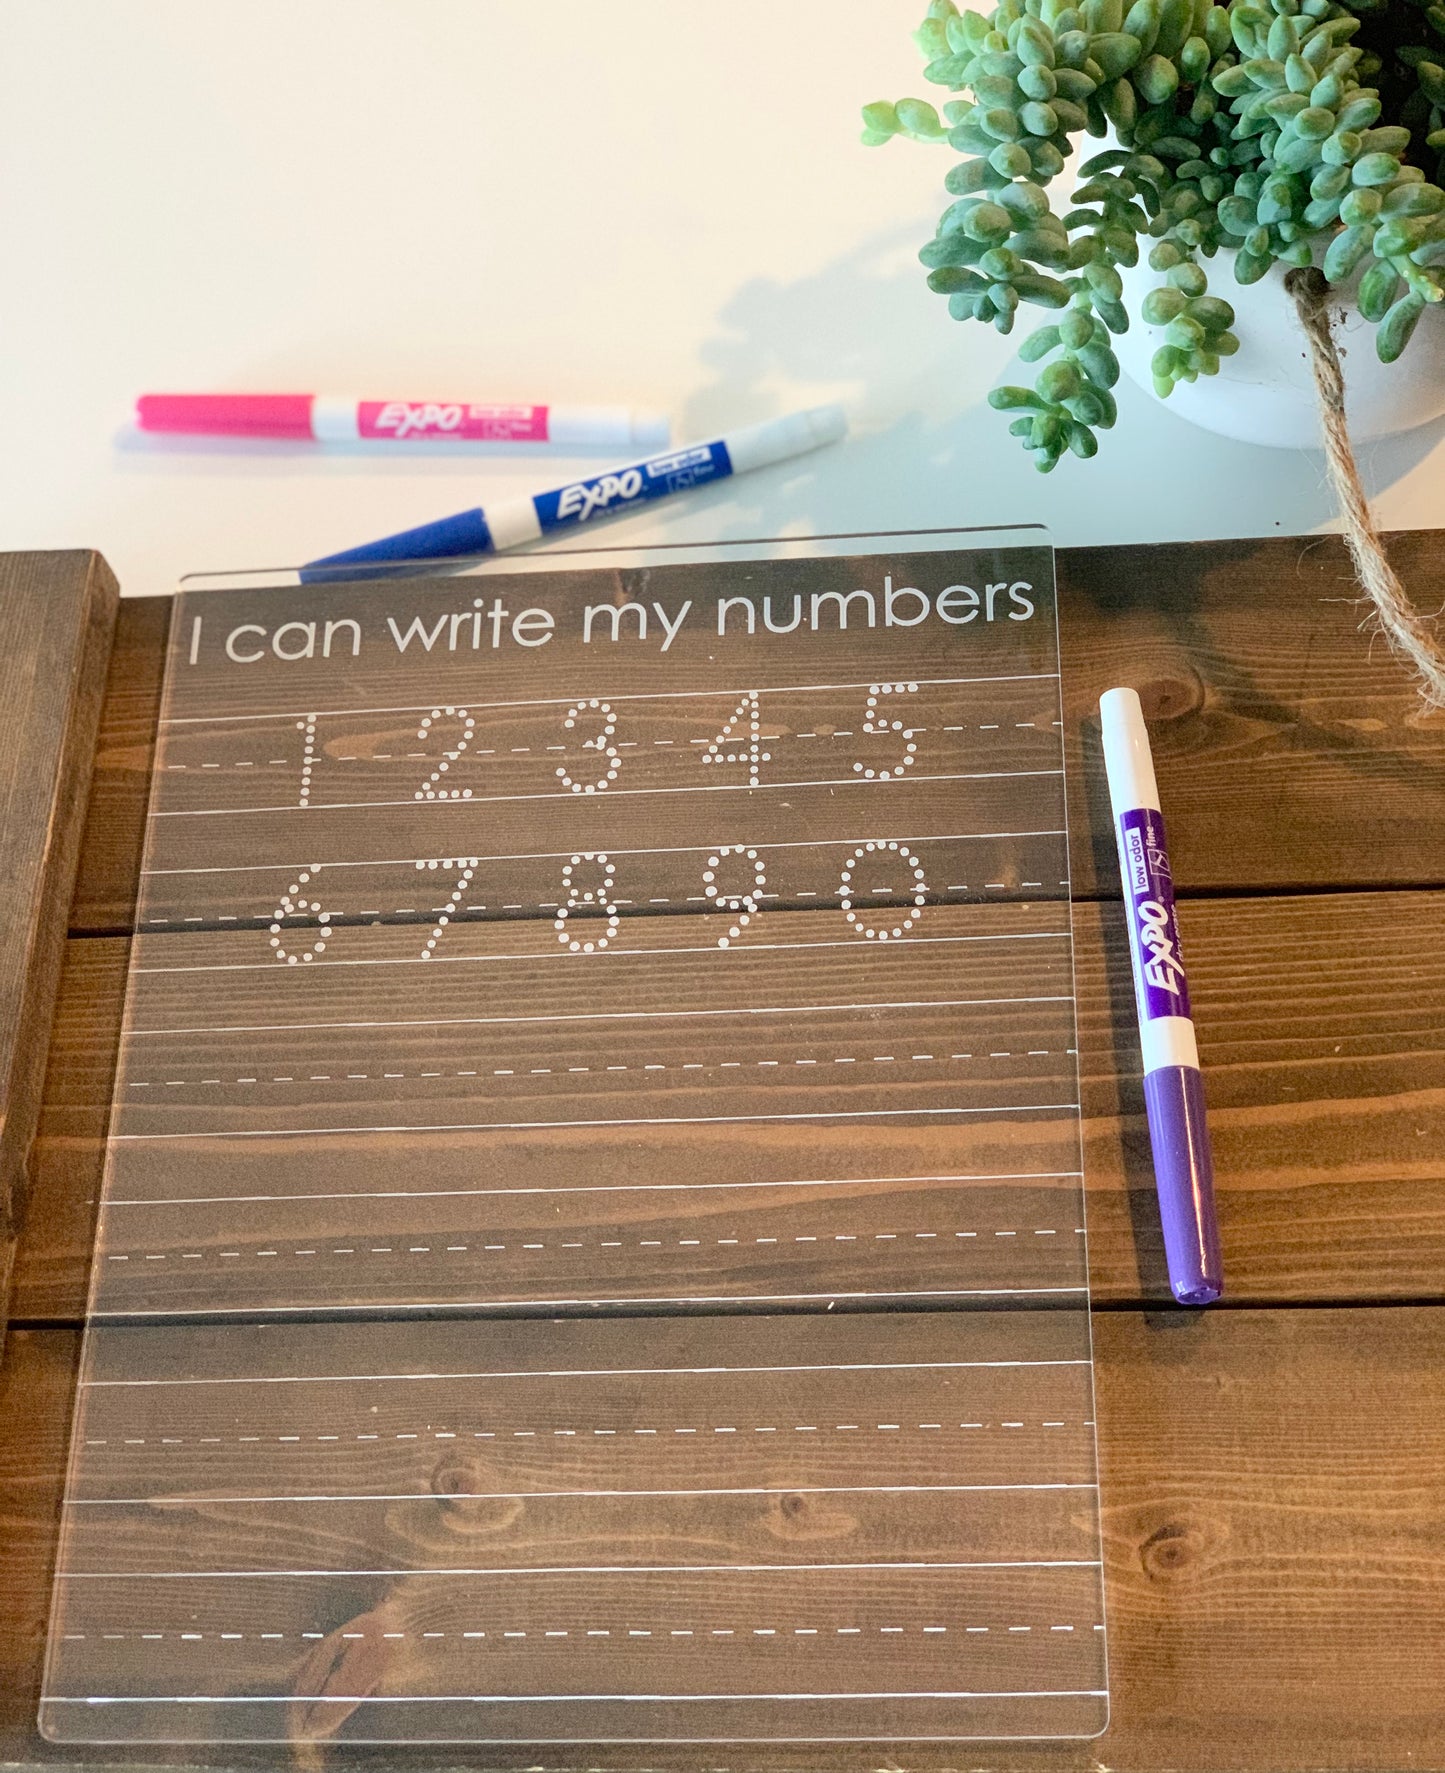 I can write my numbers Acrylic Dry Erase Board